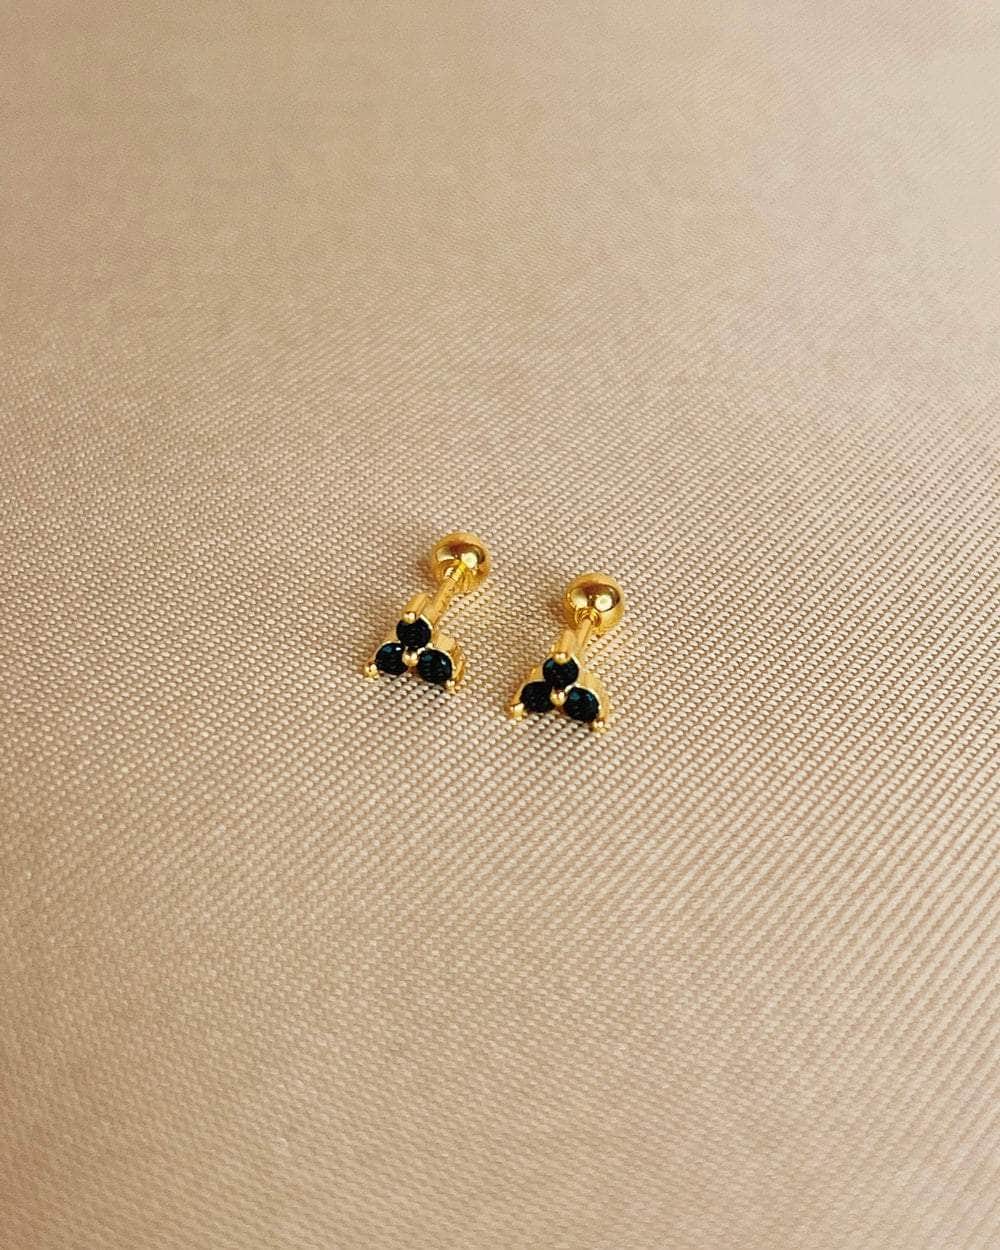 So Dainty Co. Studs Jessica Gold Studs (Black) Gold Plated 925 Sterling Silver Jewelry